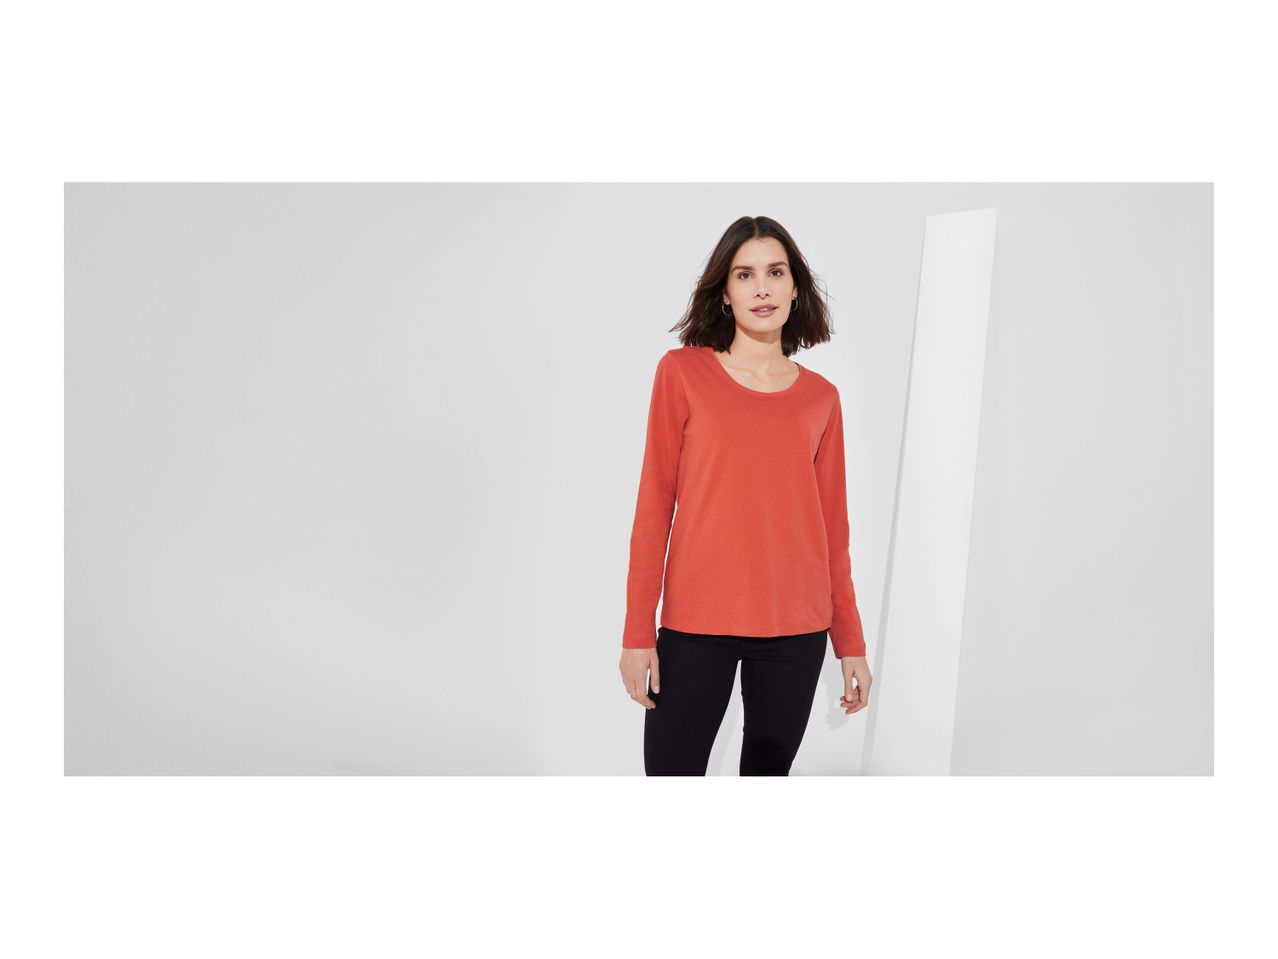 Go to full screen view: Ladies’ Long Sleeve Top - Image 8